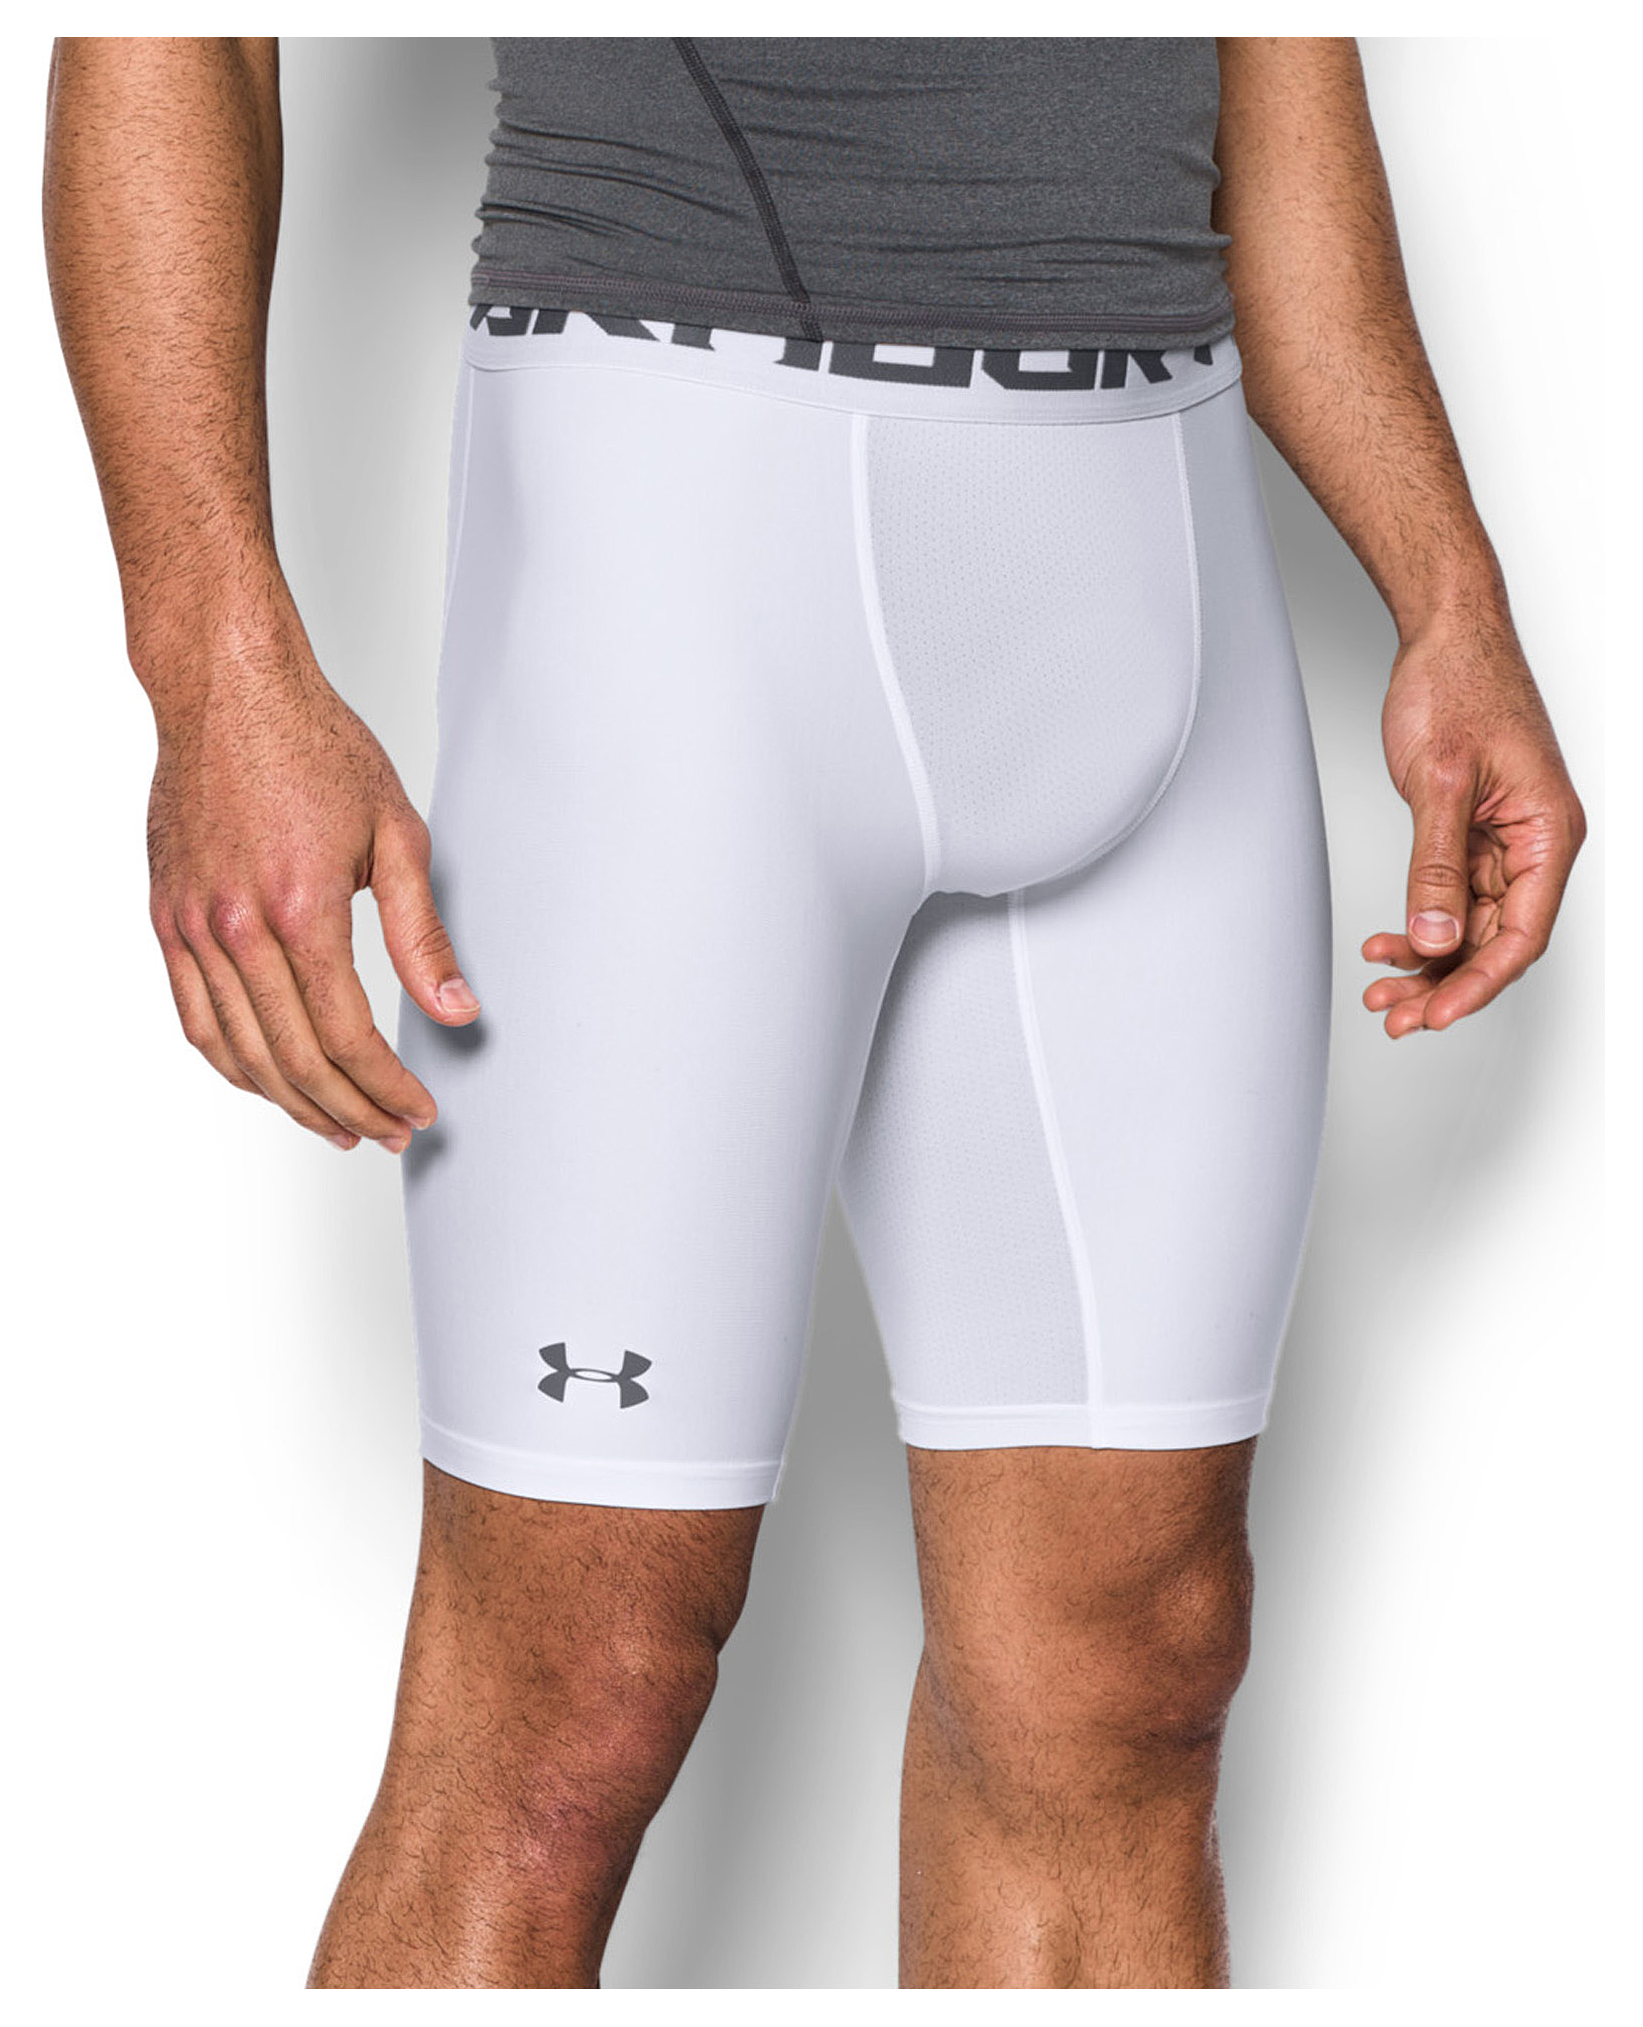 under armour 9 compression shorts